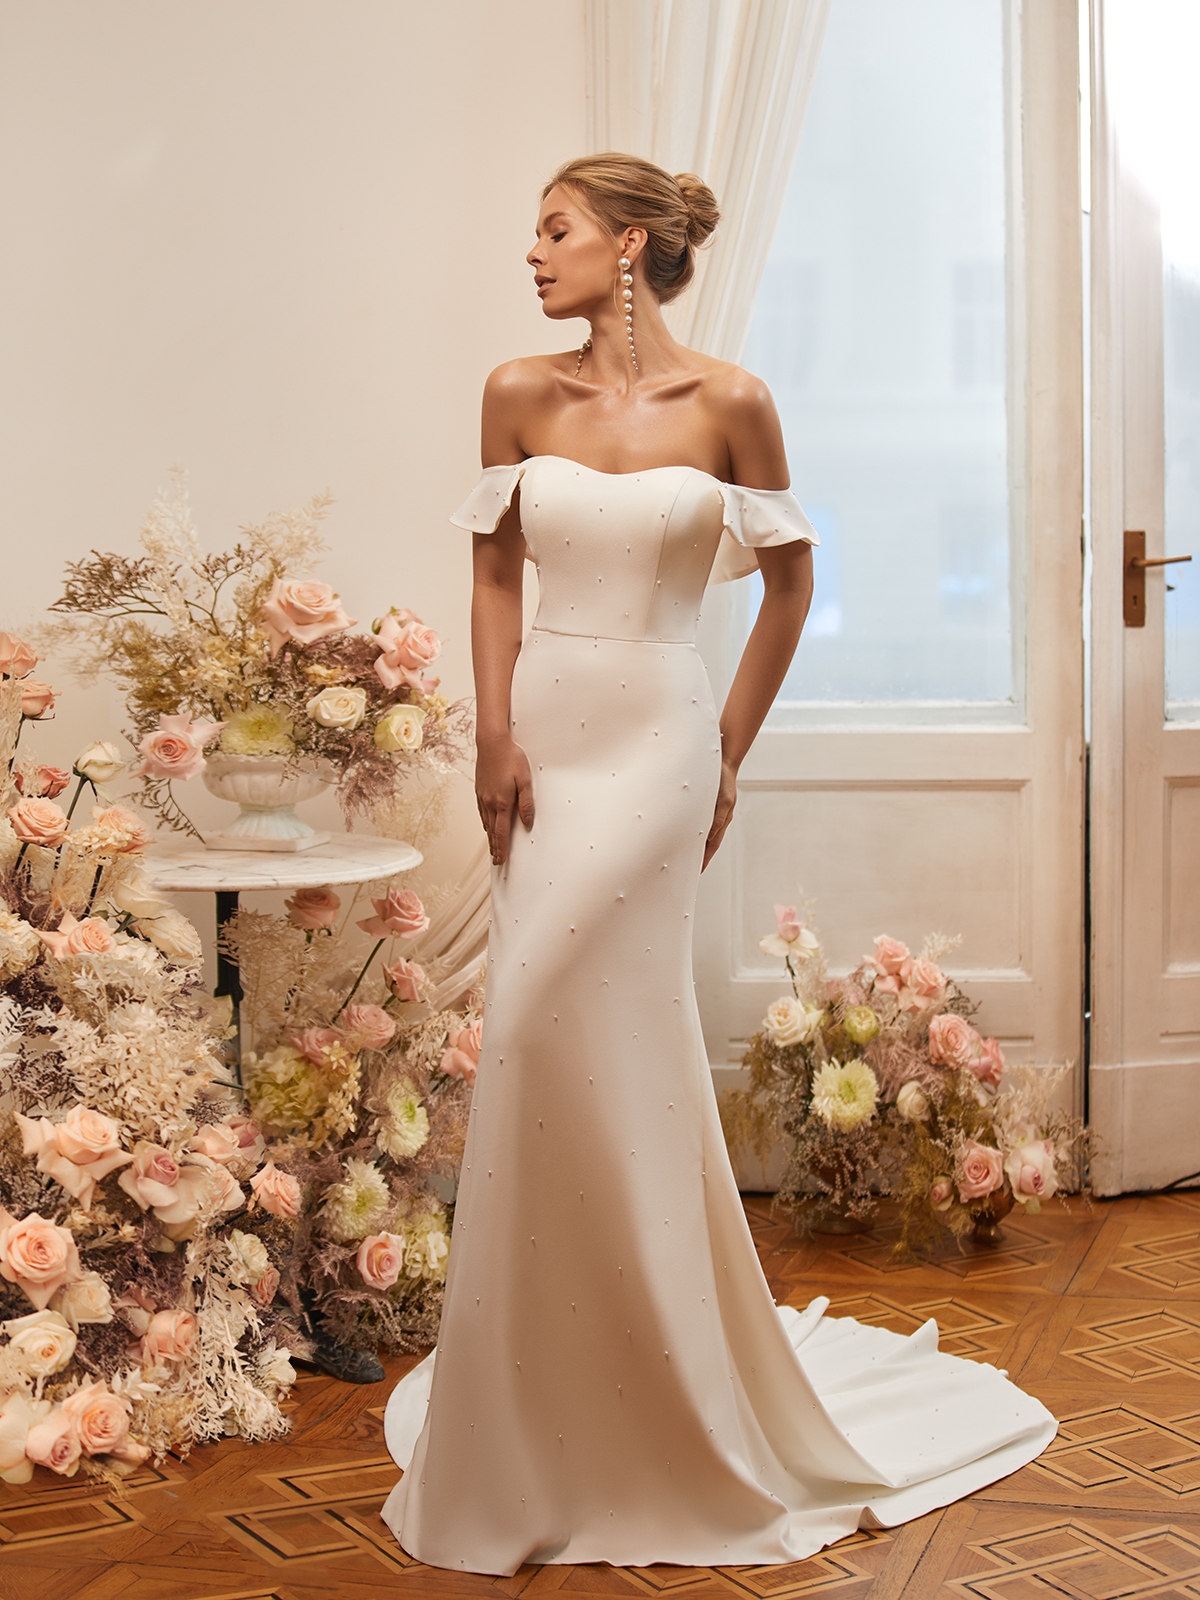 10 Timeless Wedding Dress Styles That Will Never Go Out of Style - Wedded  Wonderland